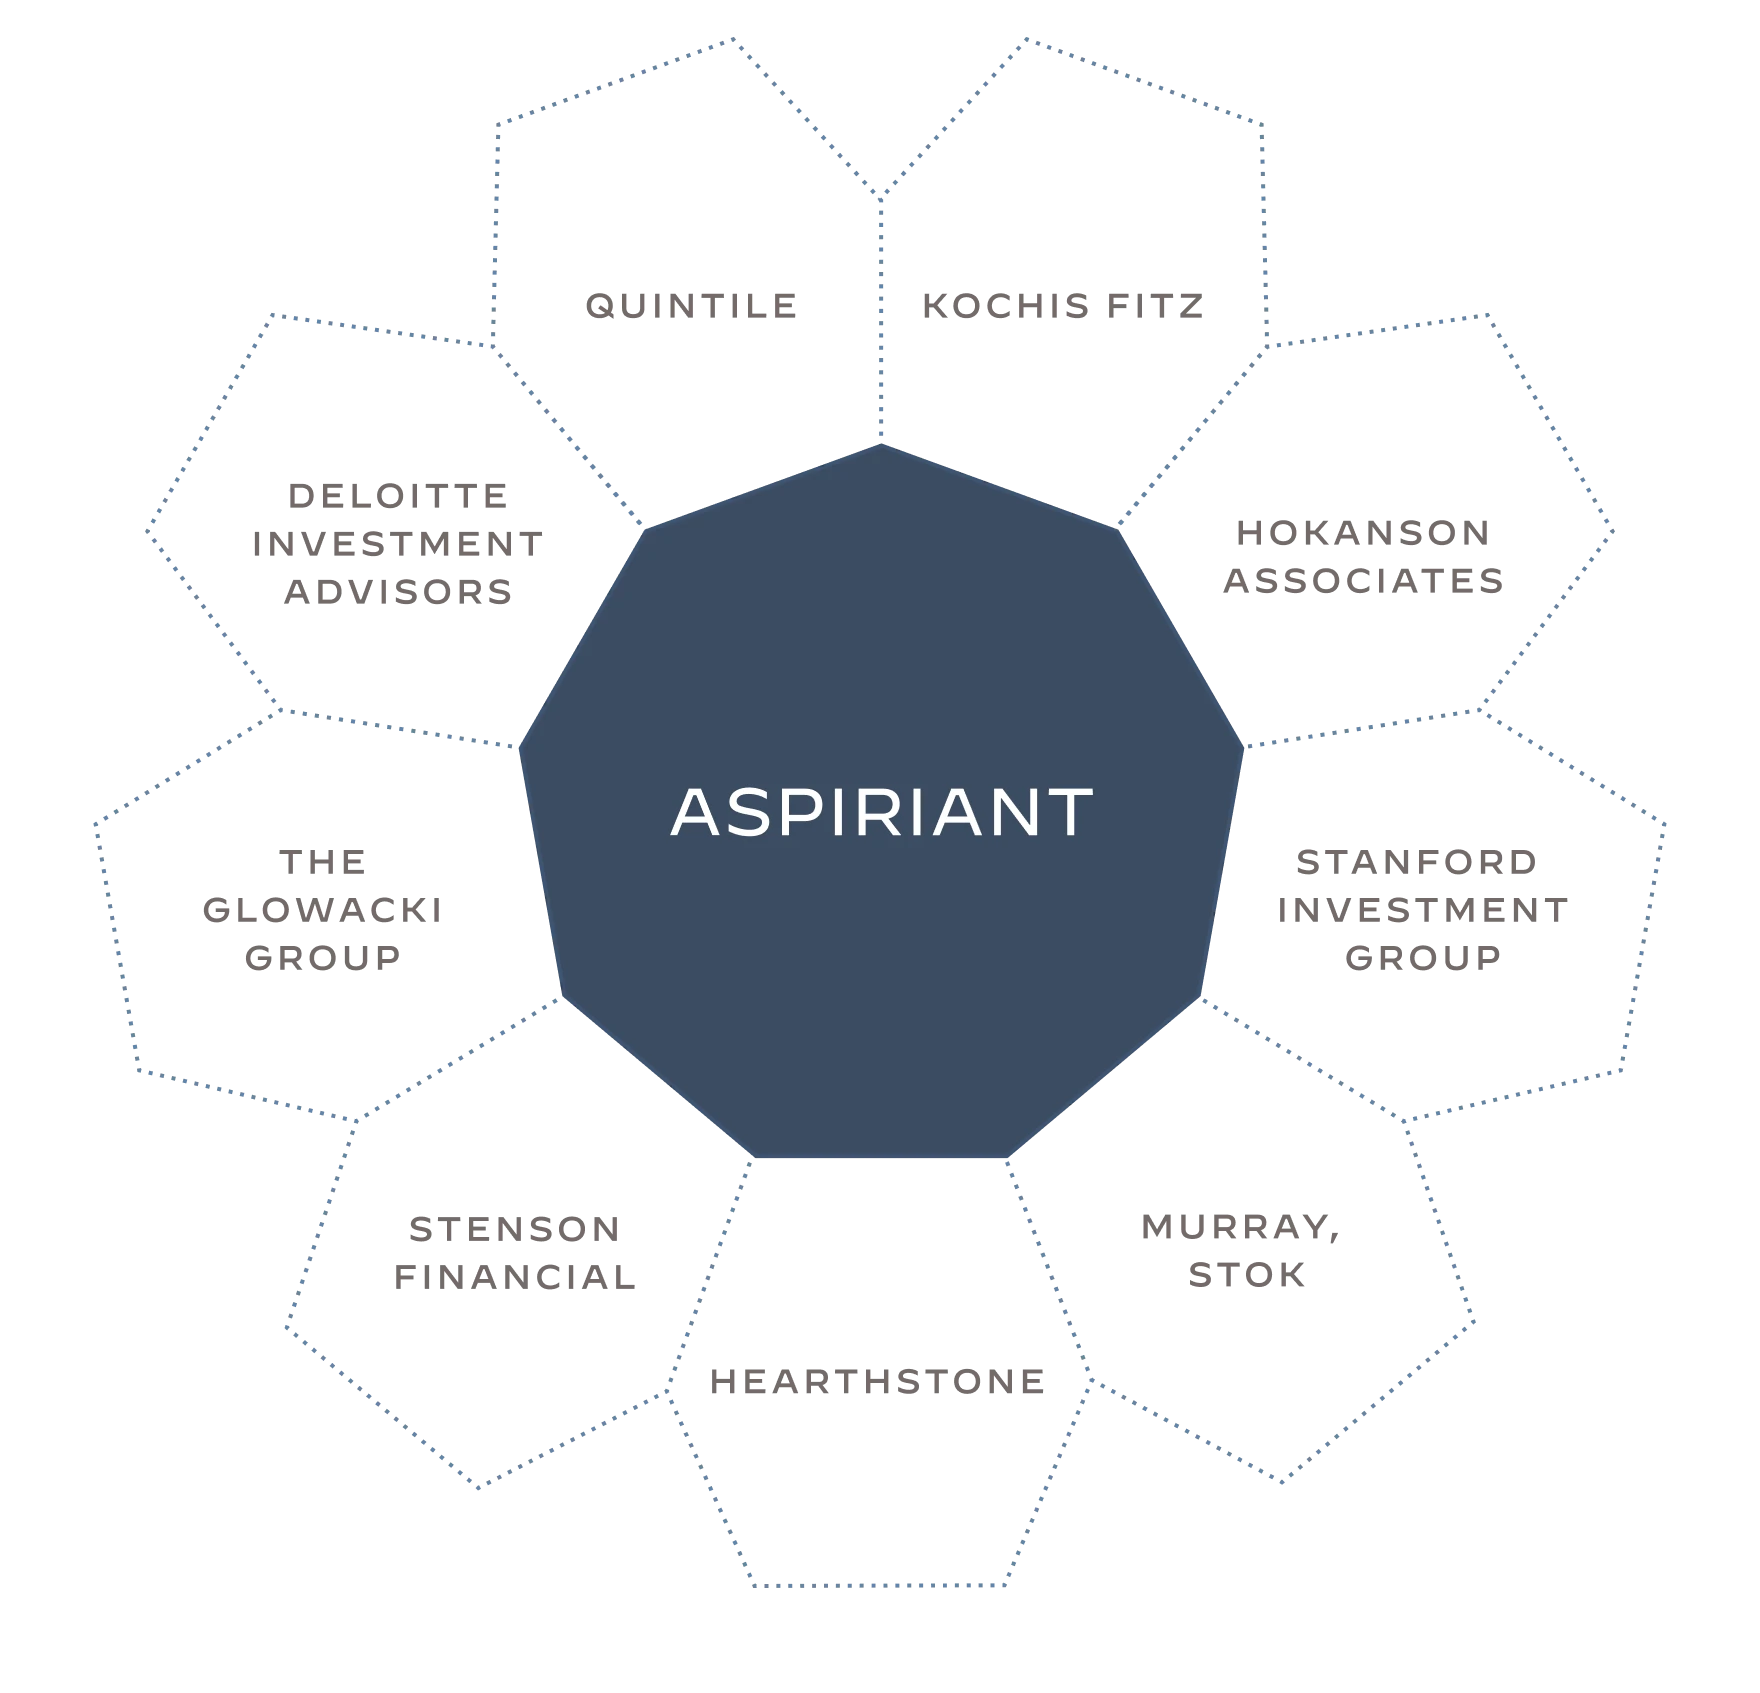 A graphic showing Aspiriant's partnerships